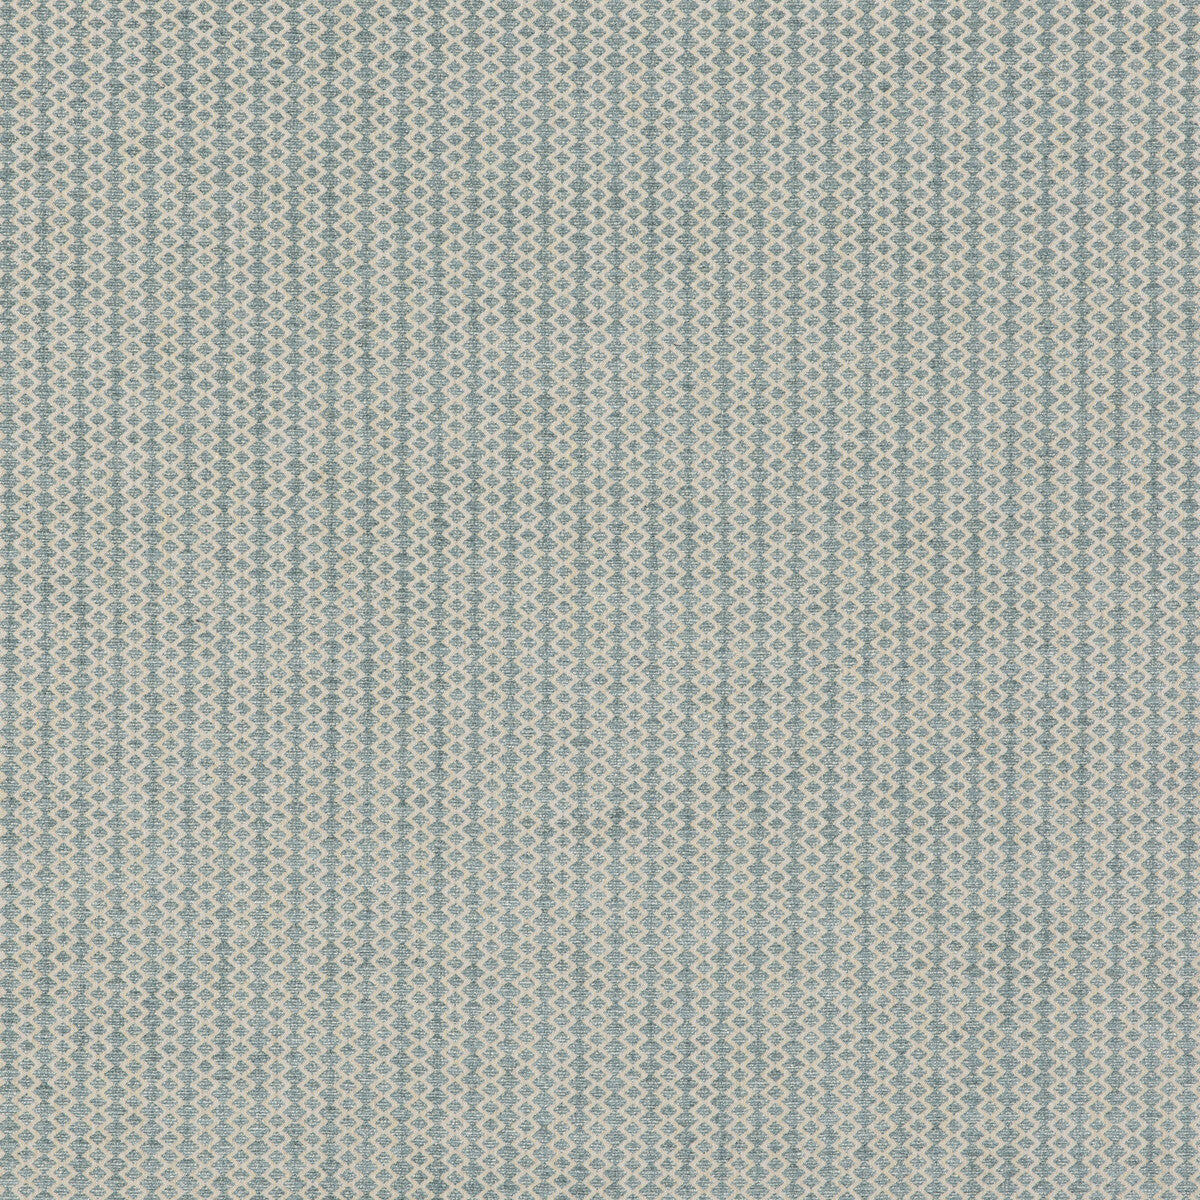 Harwood fabric in teal color - pattern BF10958.615.0 - by G P &amp; J Baker in the Baker House Textures collection